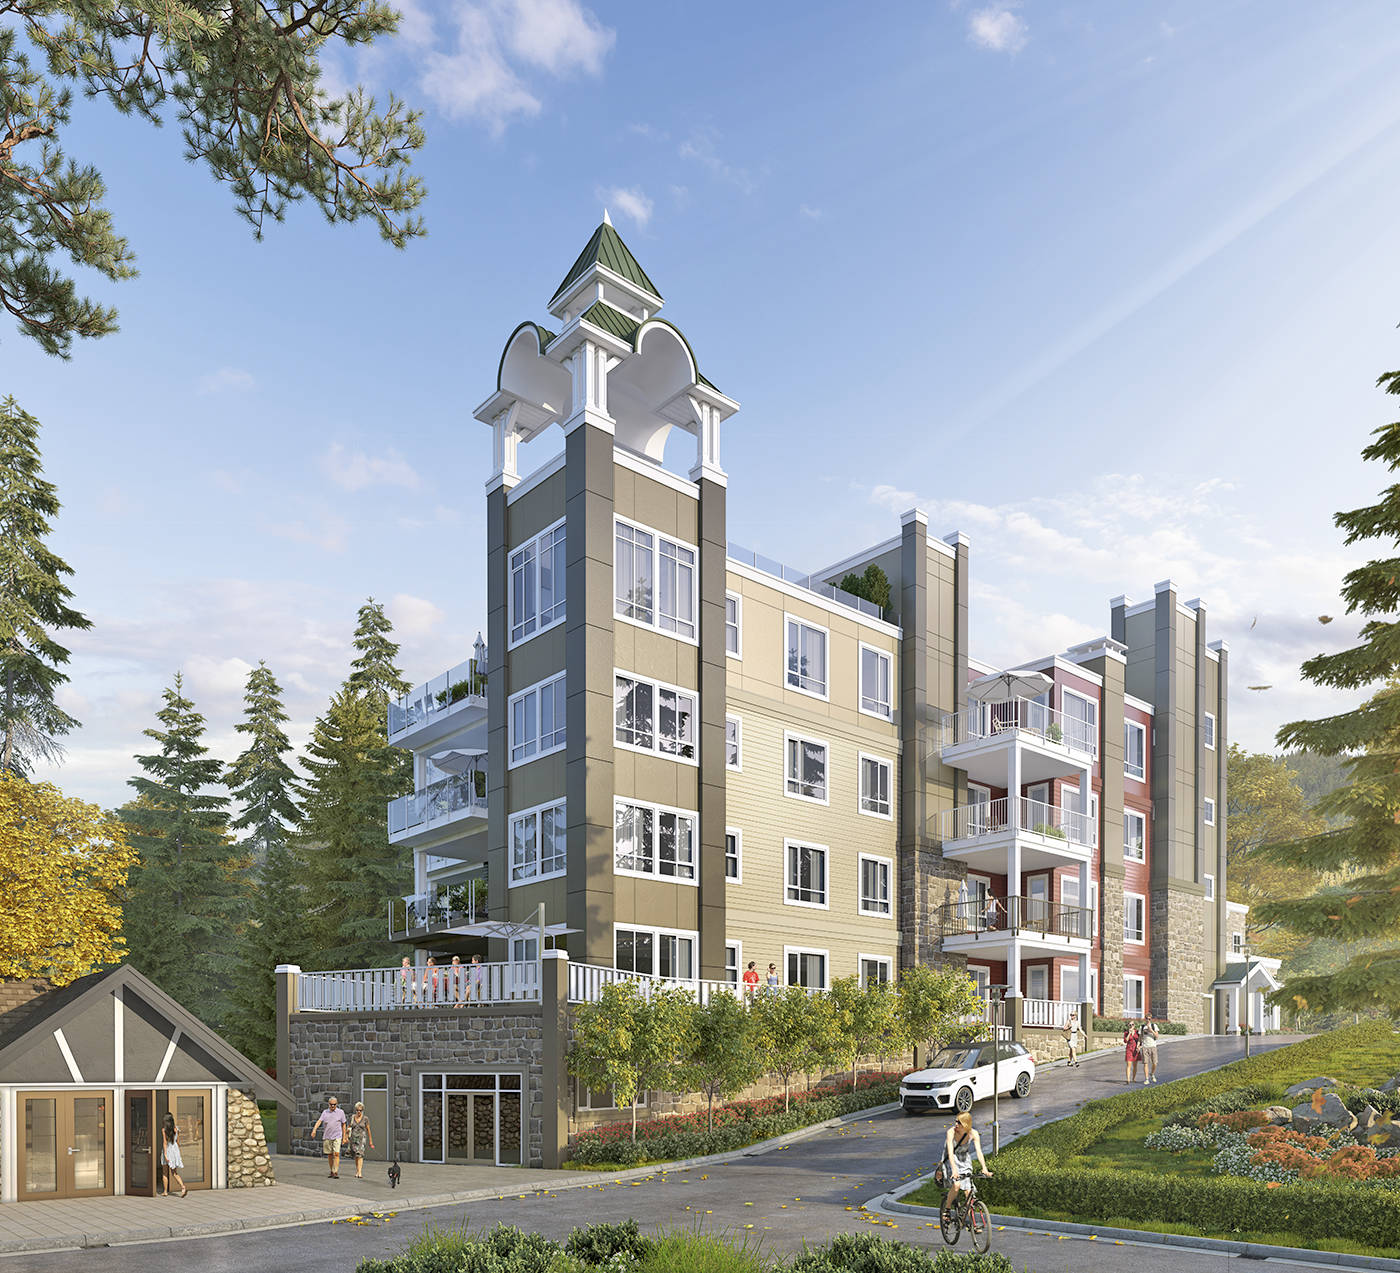 A rendering of the exterior of the condo building in phase two of Pacific Landing’s project that overlooks Esquimalt Lagoon. (Image courtesy of Pacific Landing)